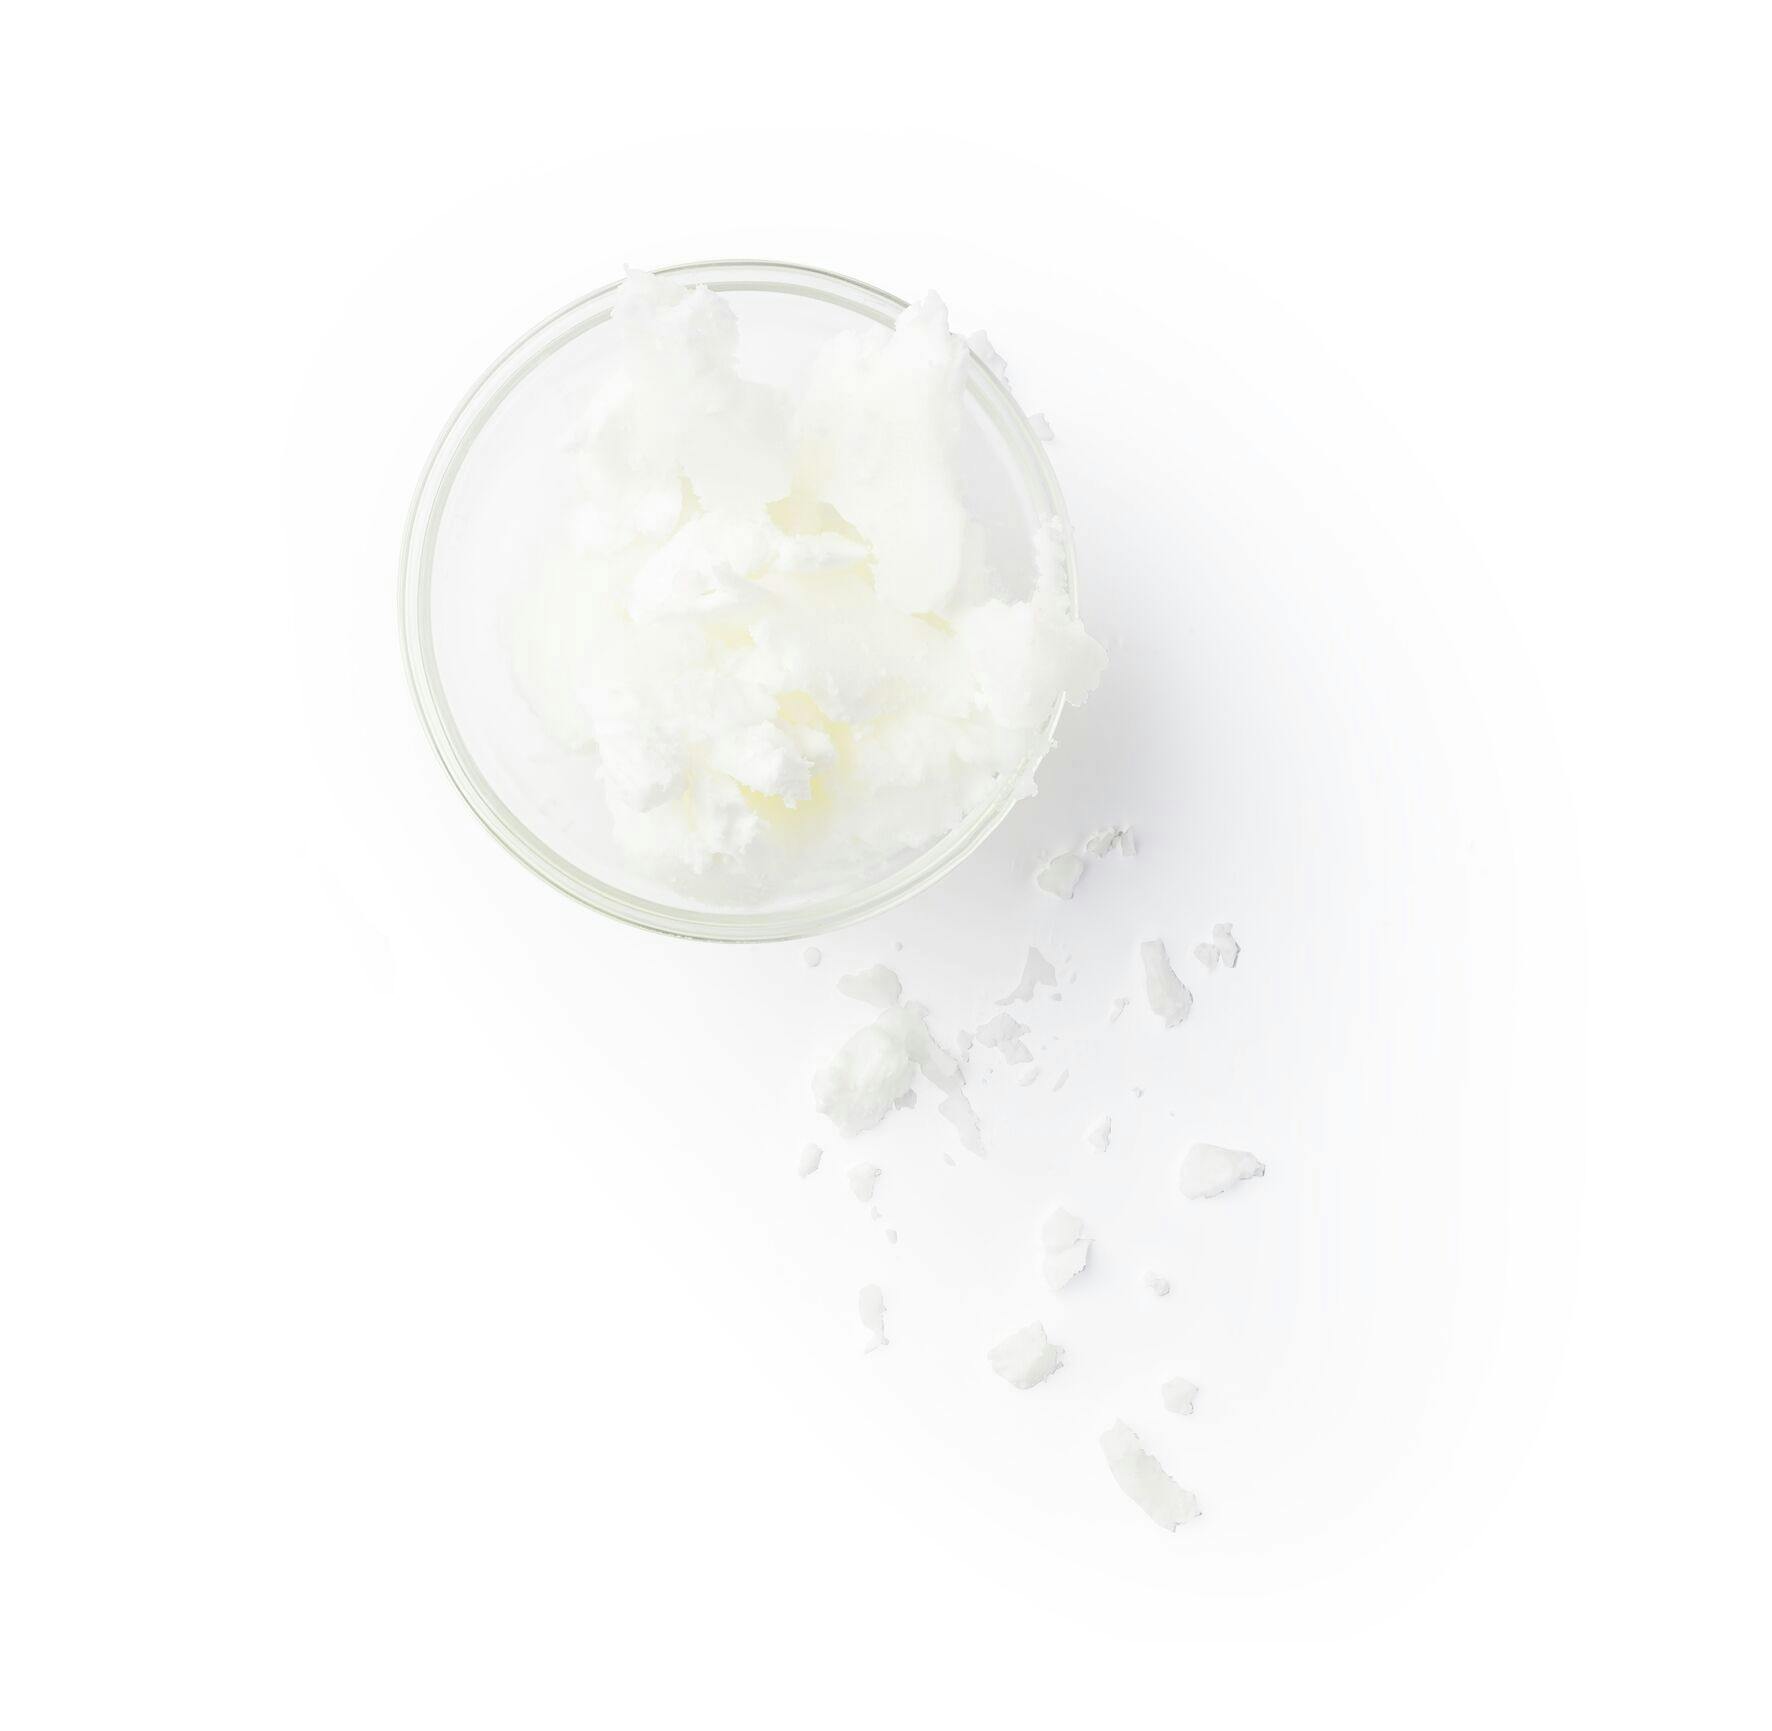 Image of Keune So Pure ingredient shea butter